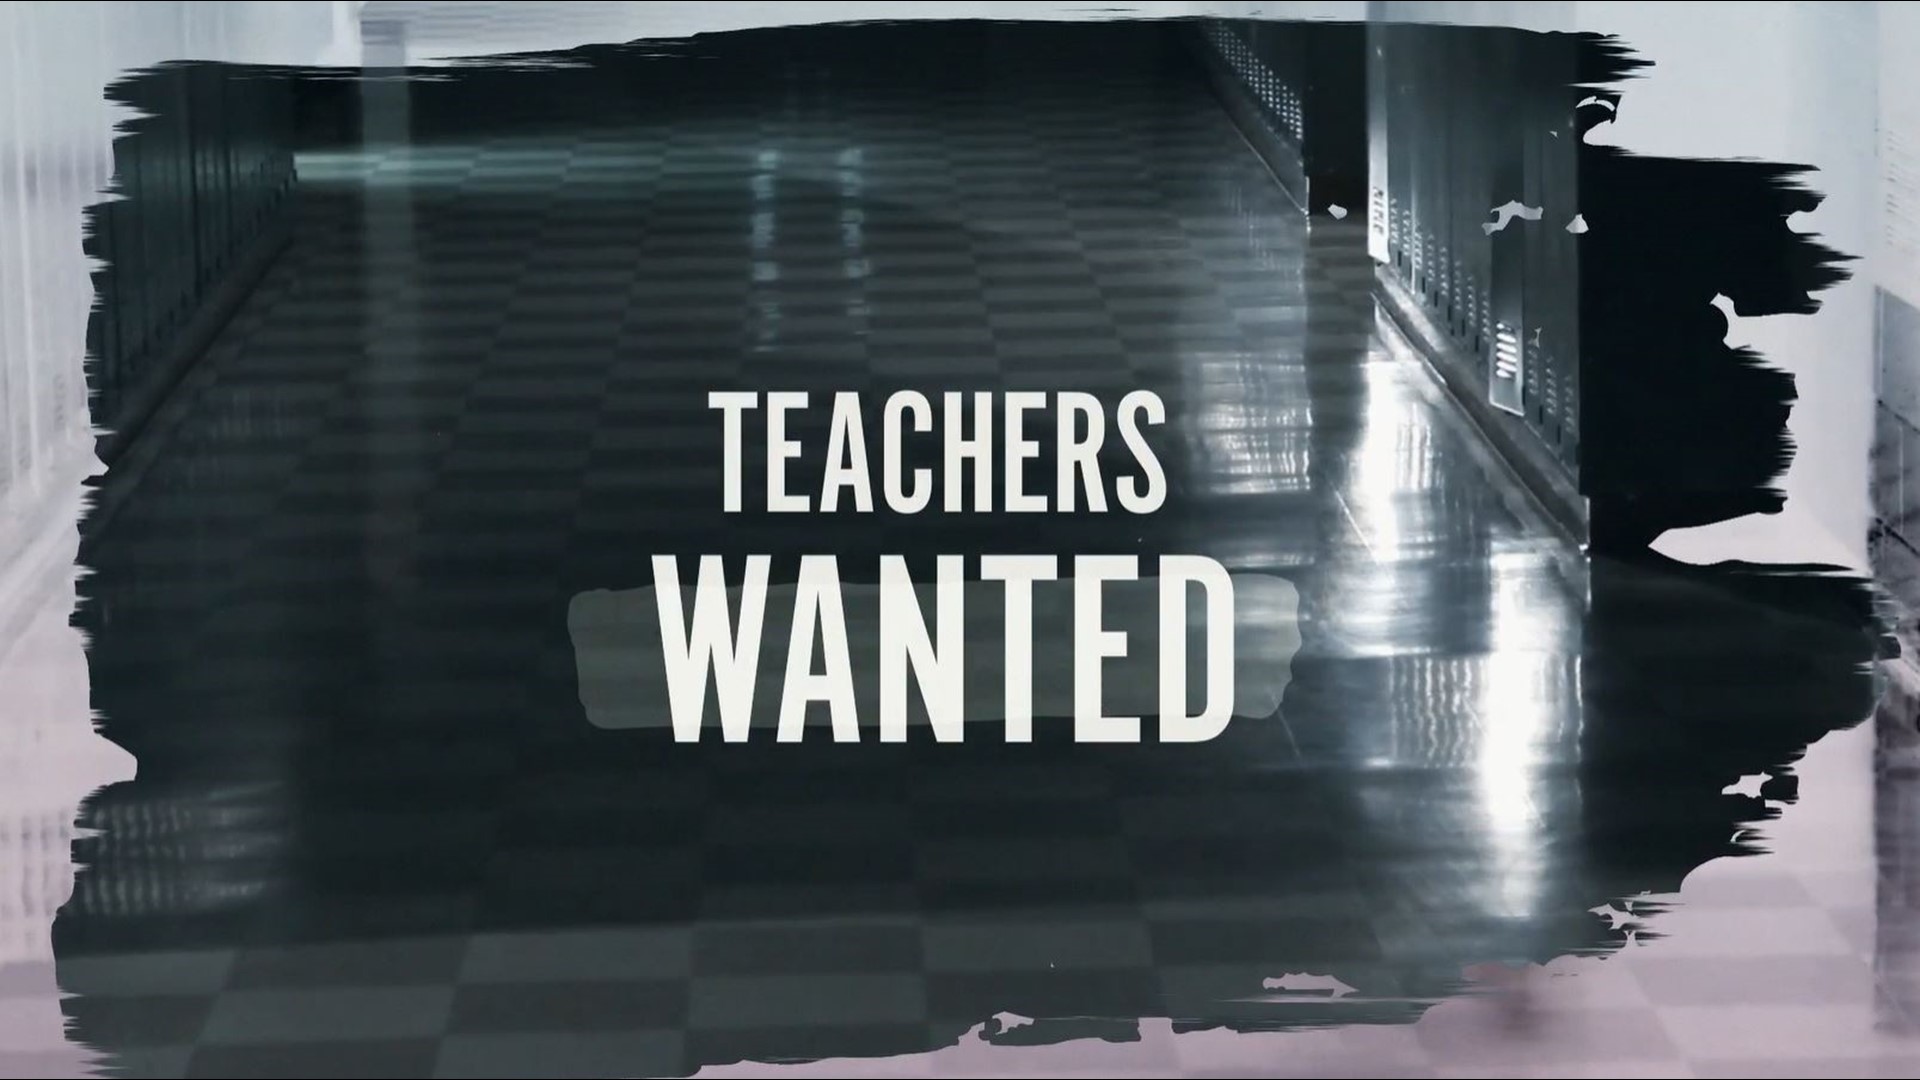 Teacher shortages have been seen in cities across the U.S. But now there is a push to recruit and retain the next generation of teachers.